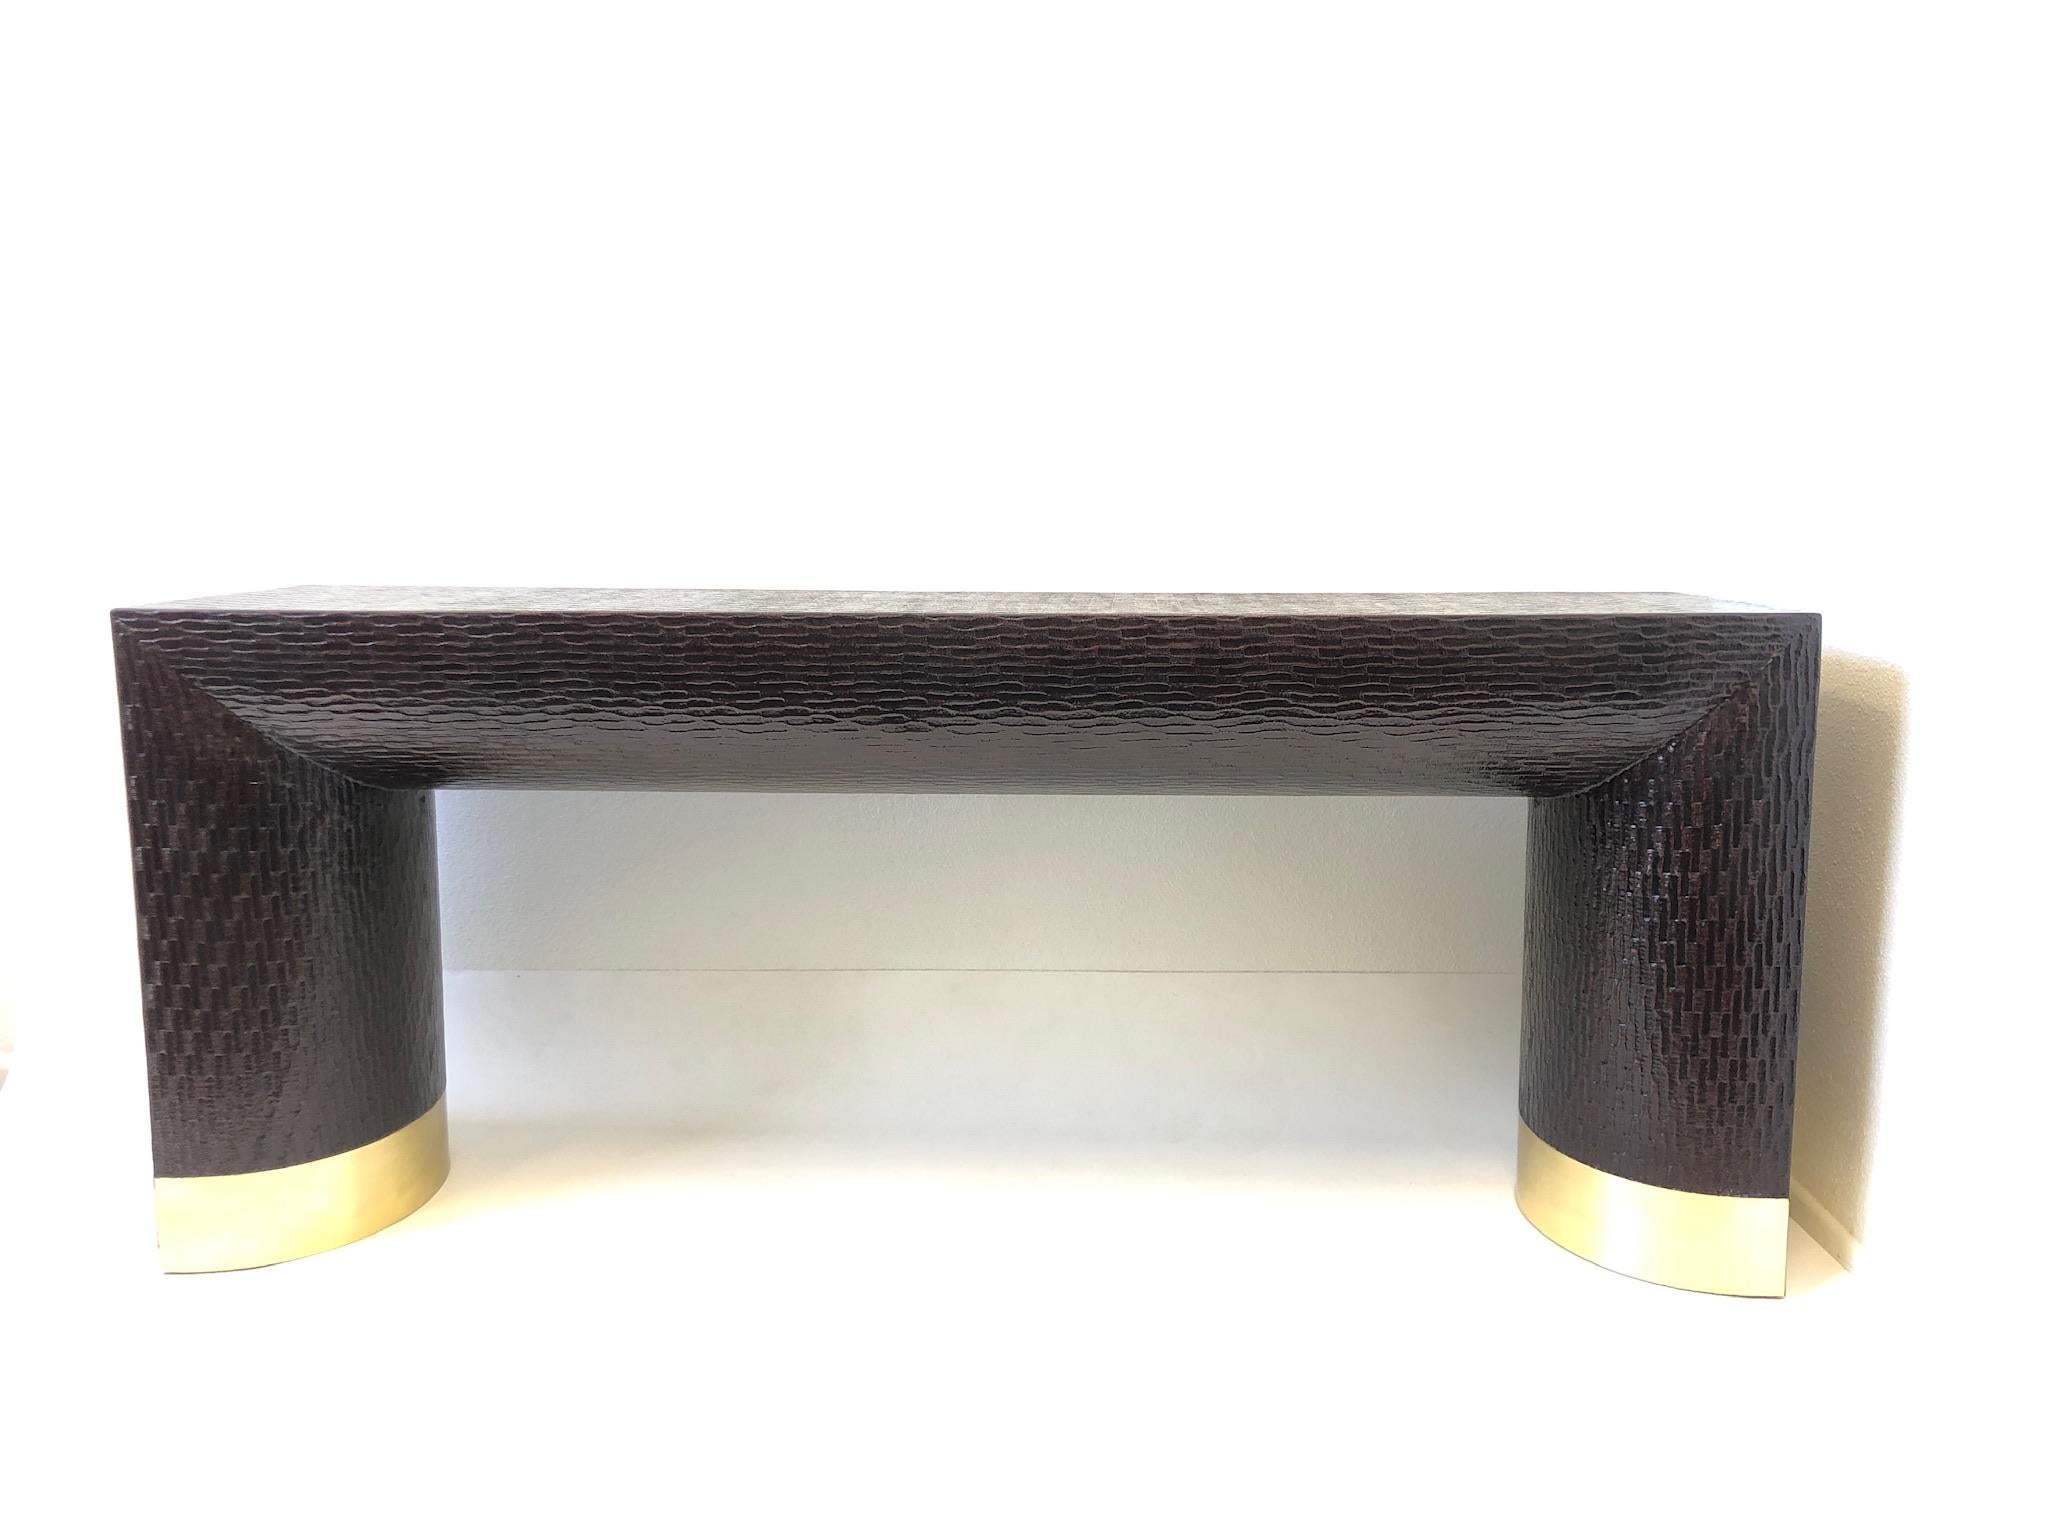 American Lacquered Grasscloth and Brass Console Table by Baker Furniture